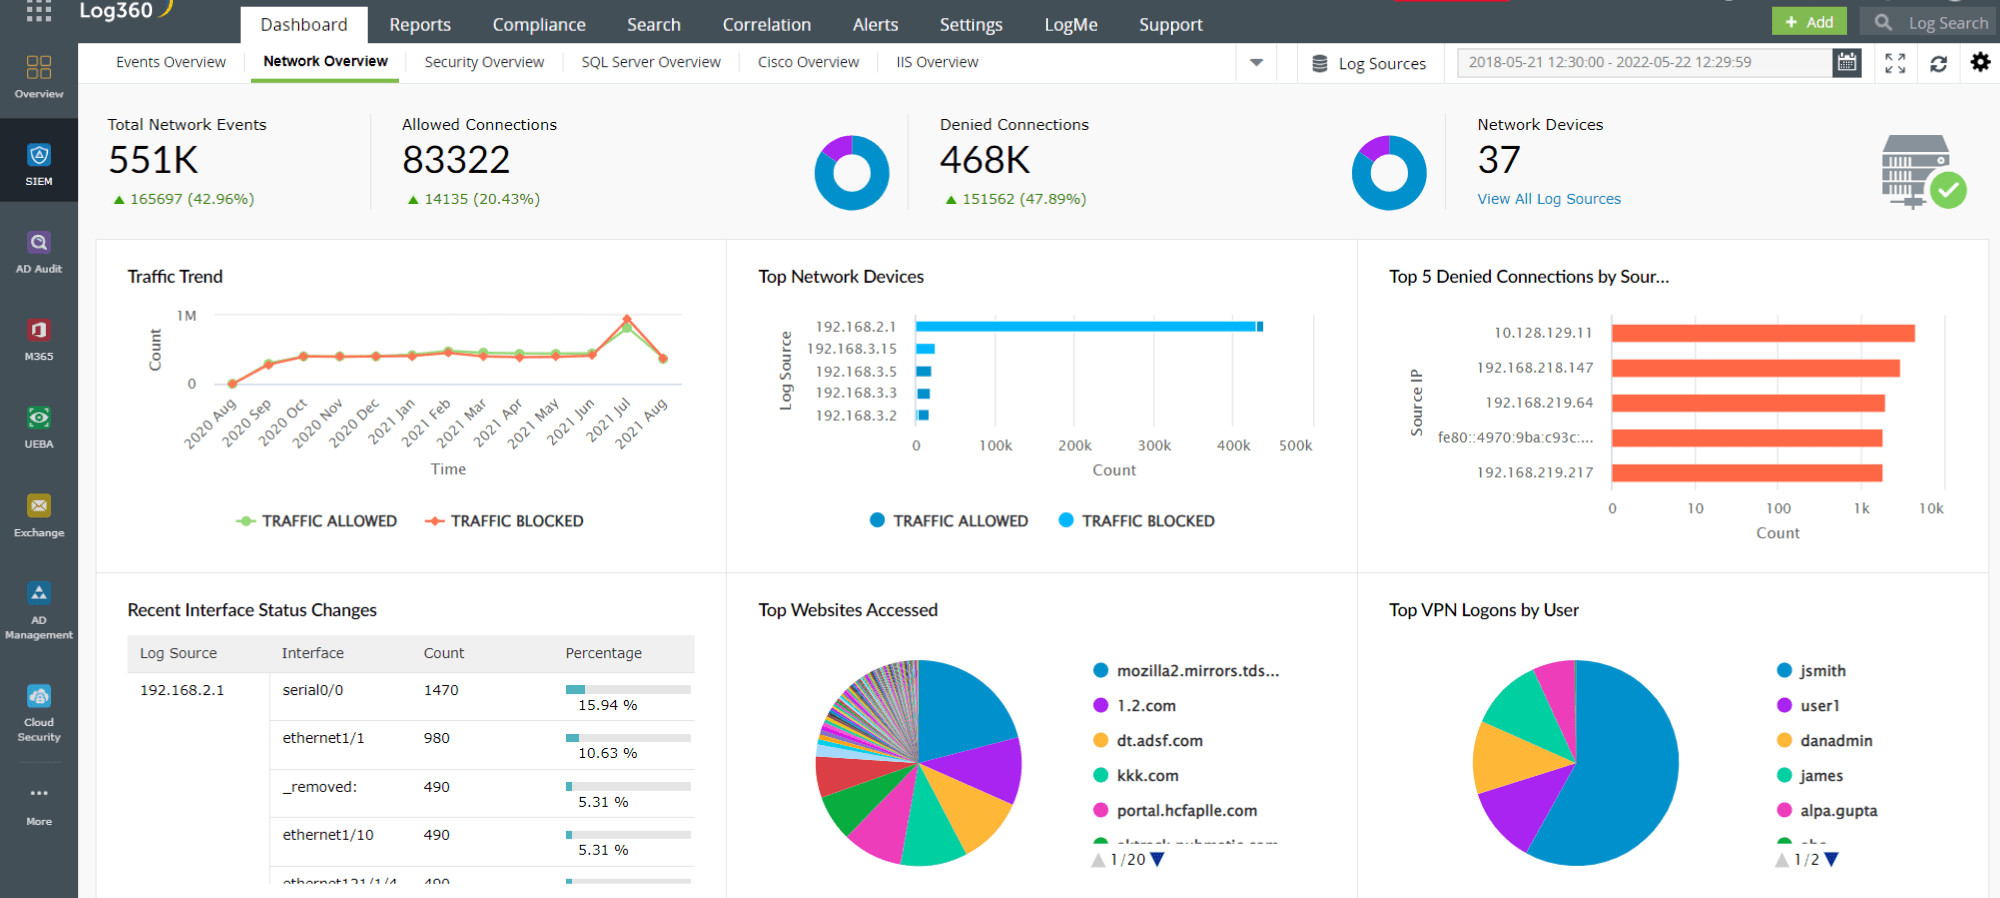 Network overview dashboard